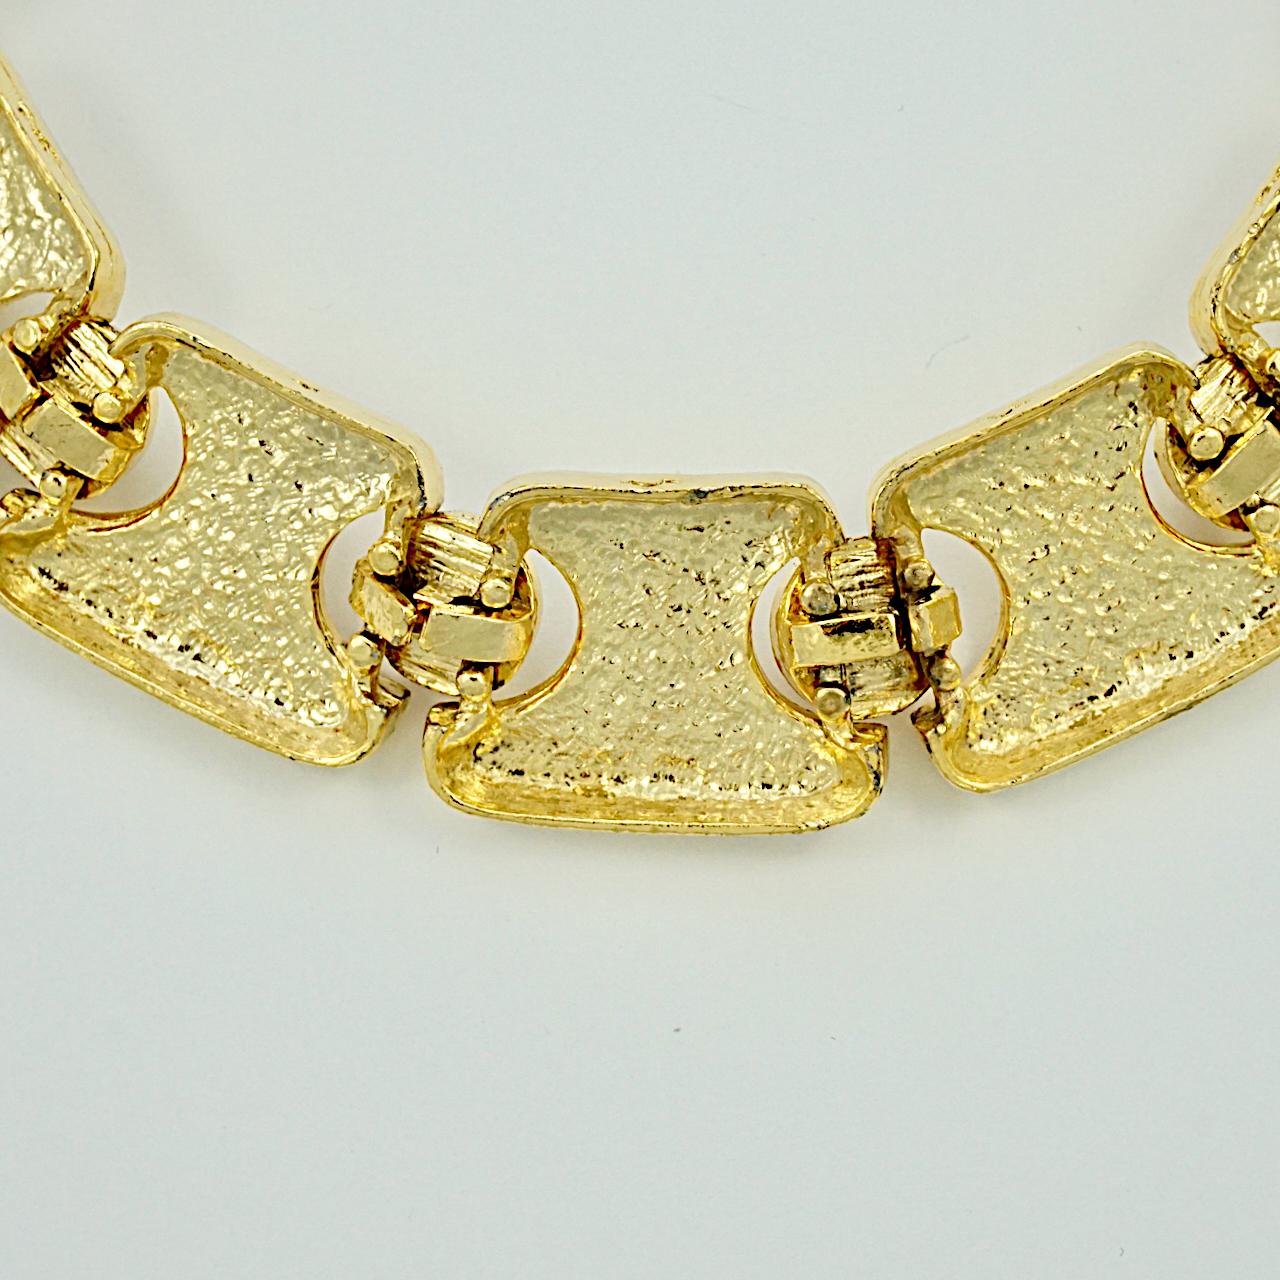 Gold Plated Textured Link Collar Necklace with Faux Pearls circa 1980s For Sale 3